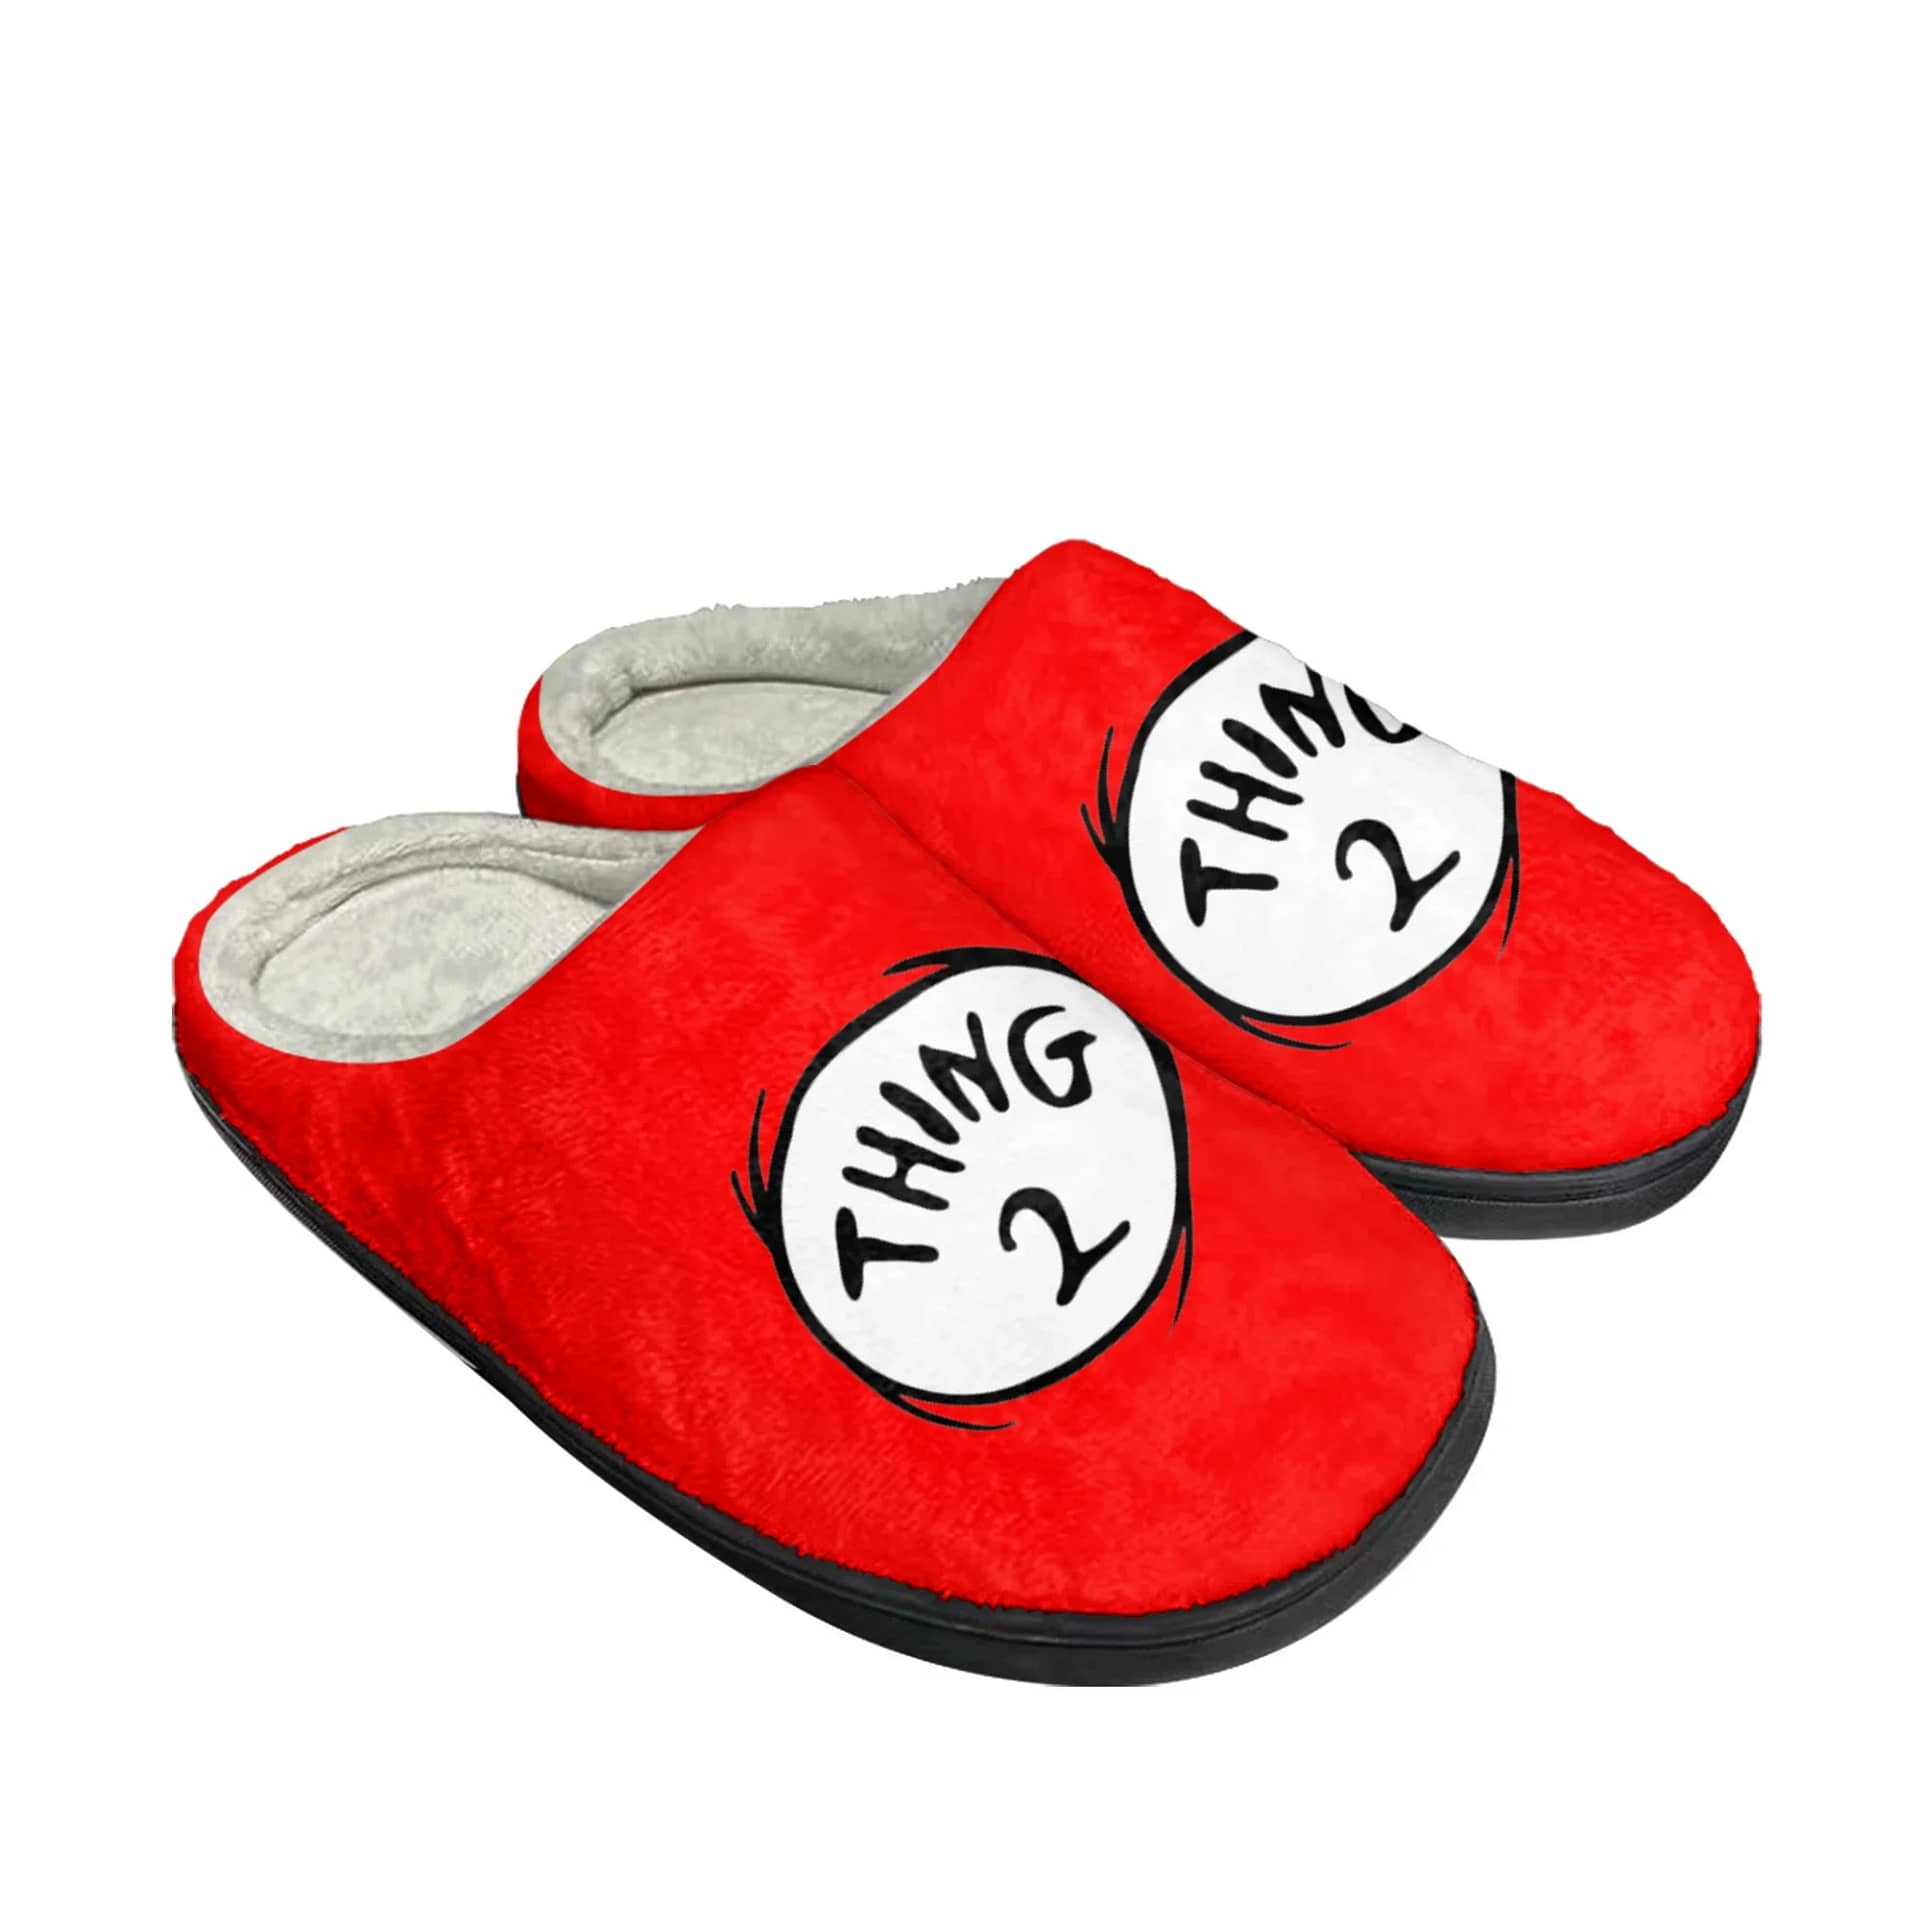 Thing Red Thing 2 Custom Shoes Slippers